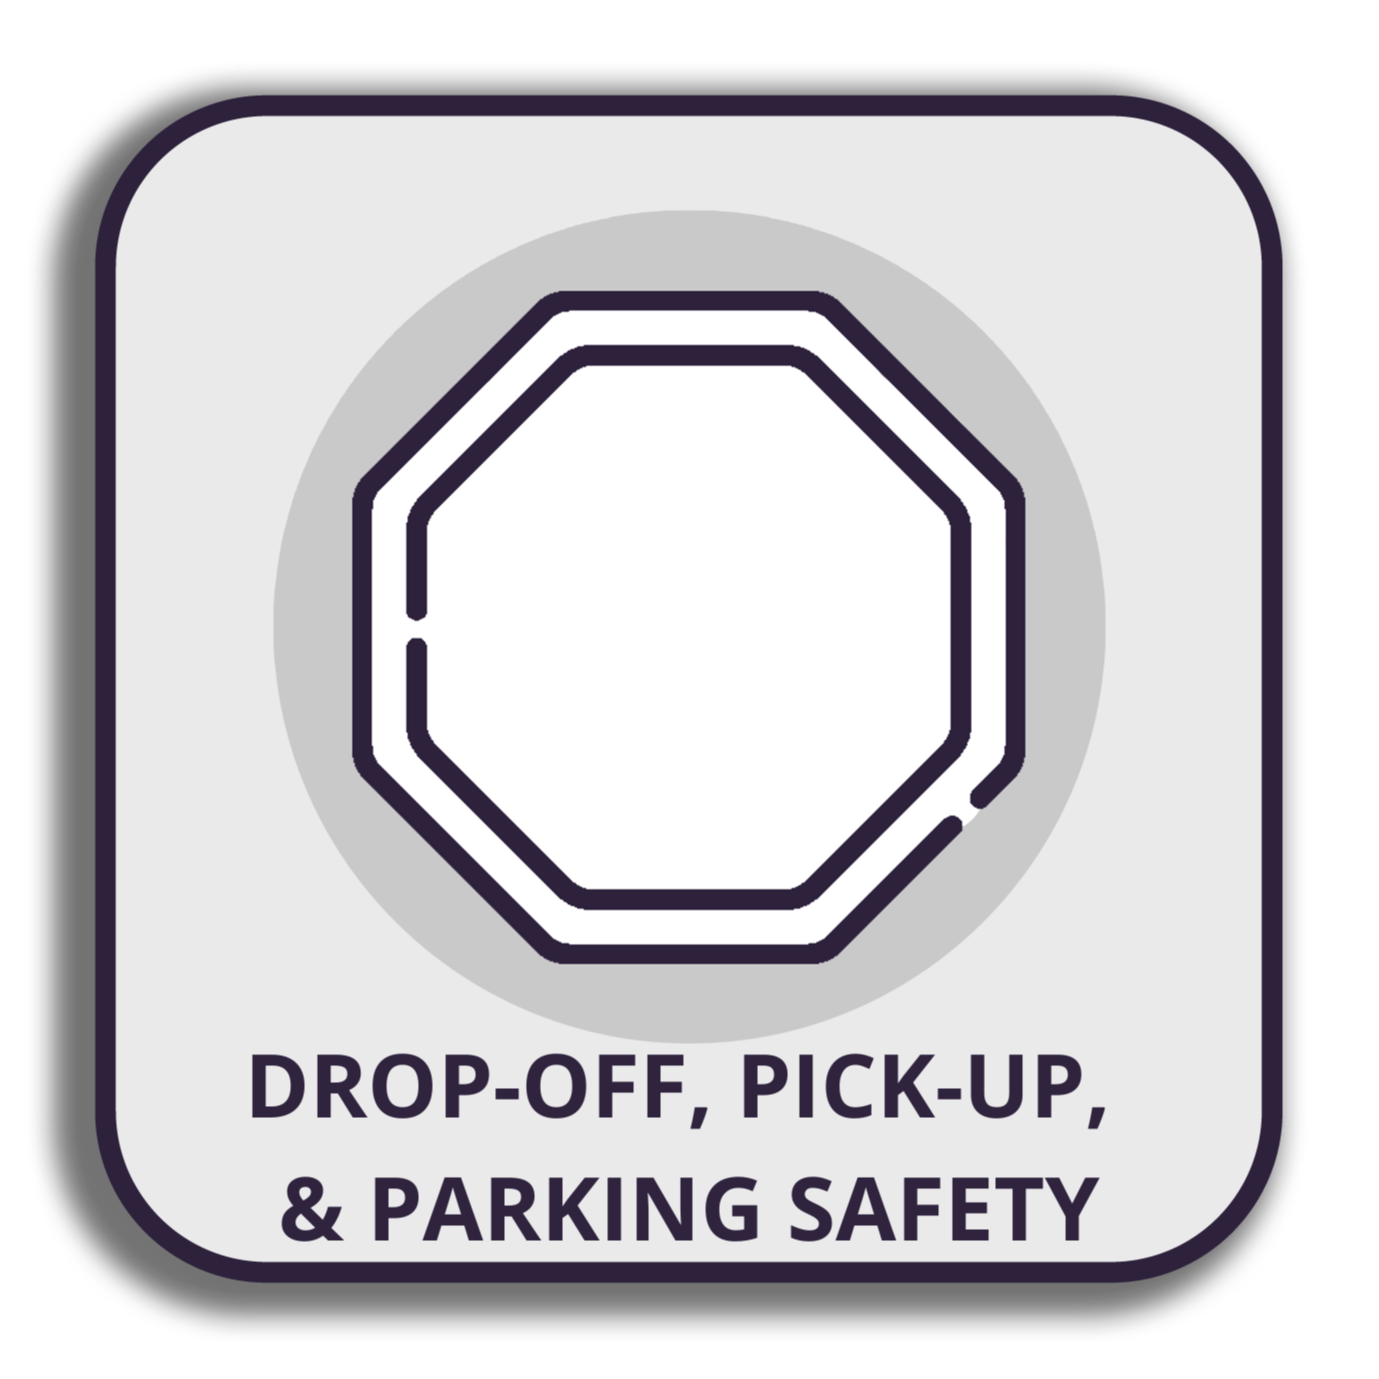 Drop-off, pick-up, & parking safety